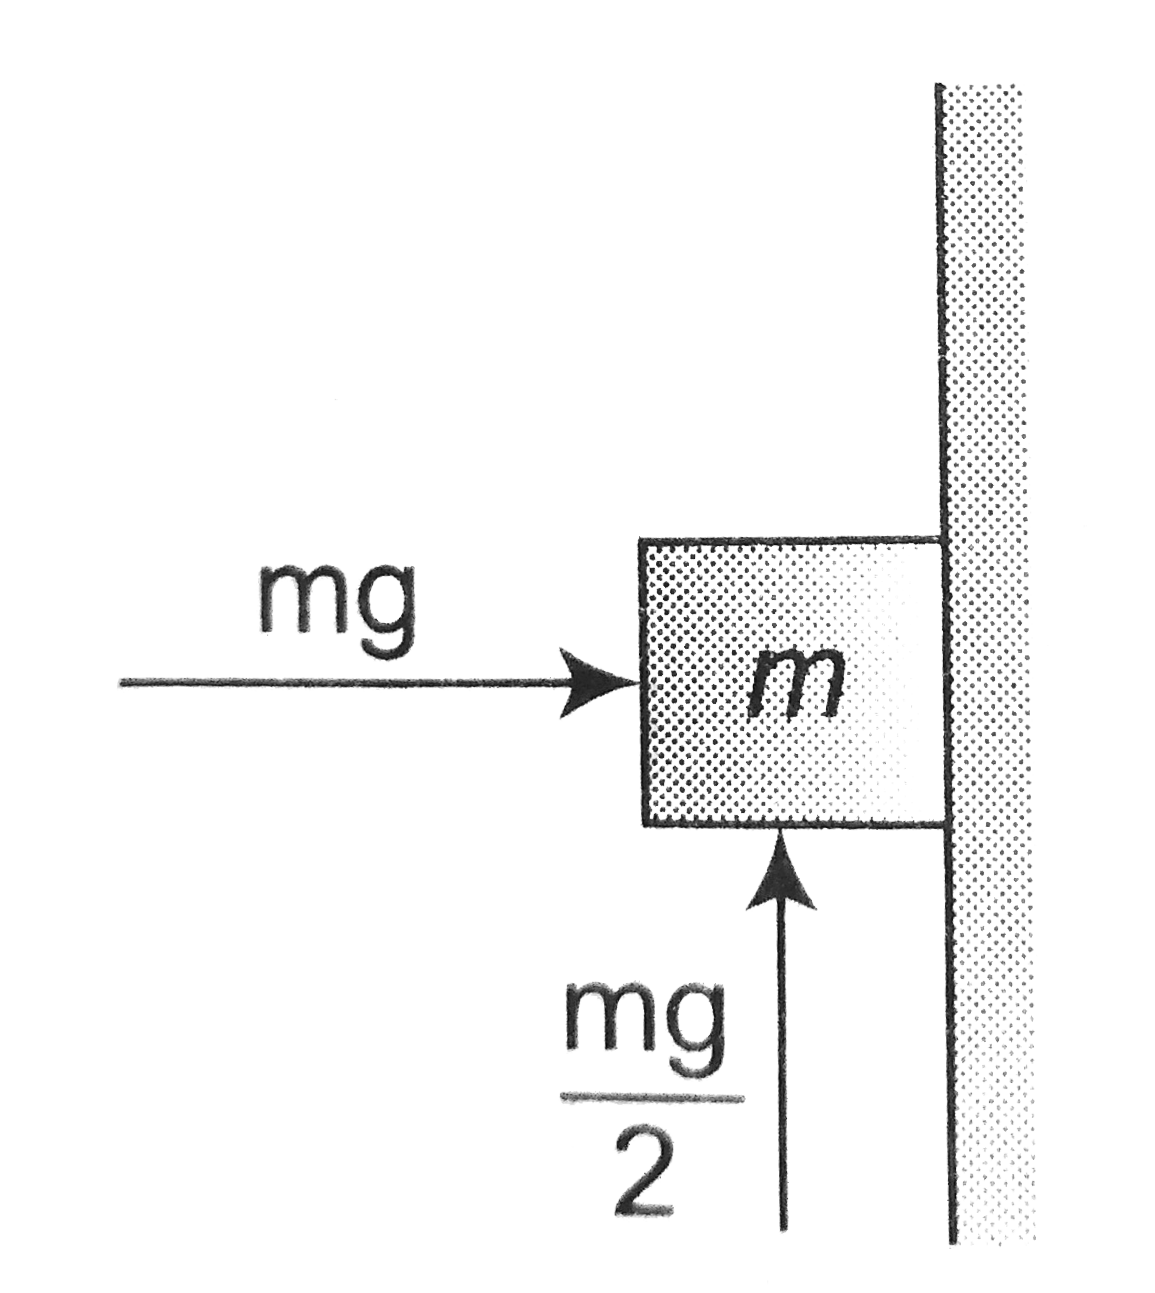 A block pressed against the vertical wall is in equilibrium. The minimum coefficient of friction is: